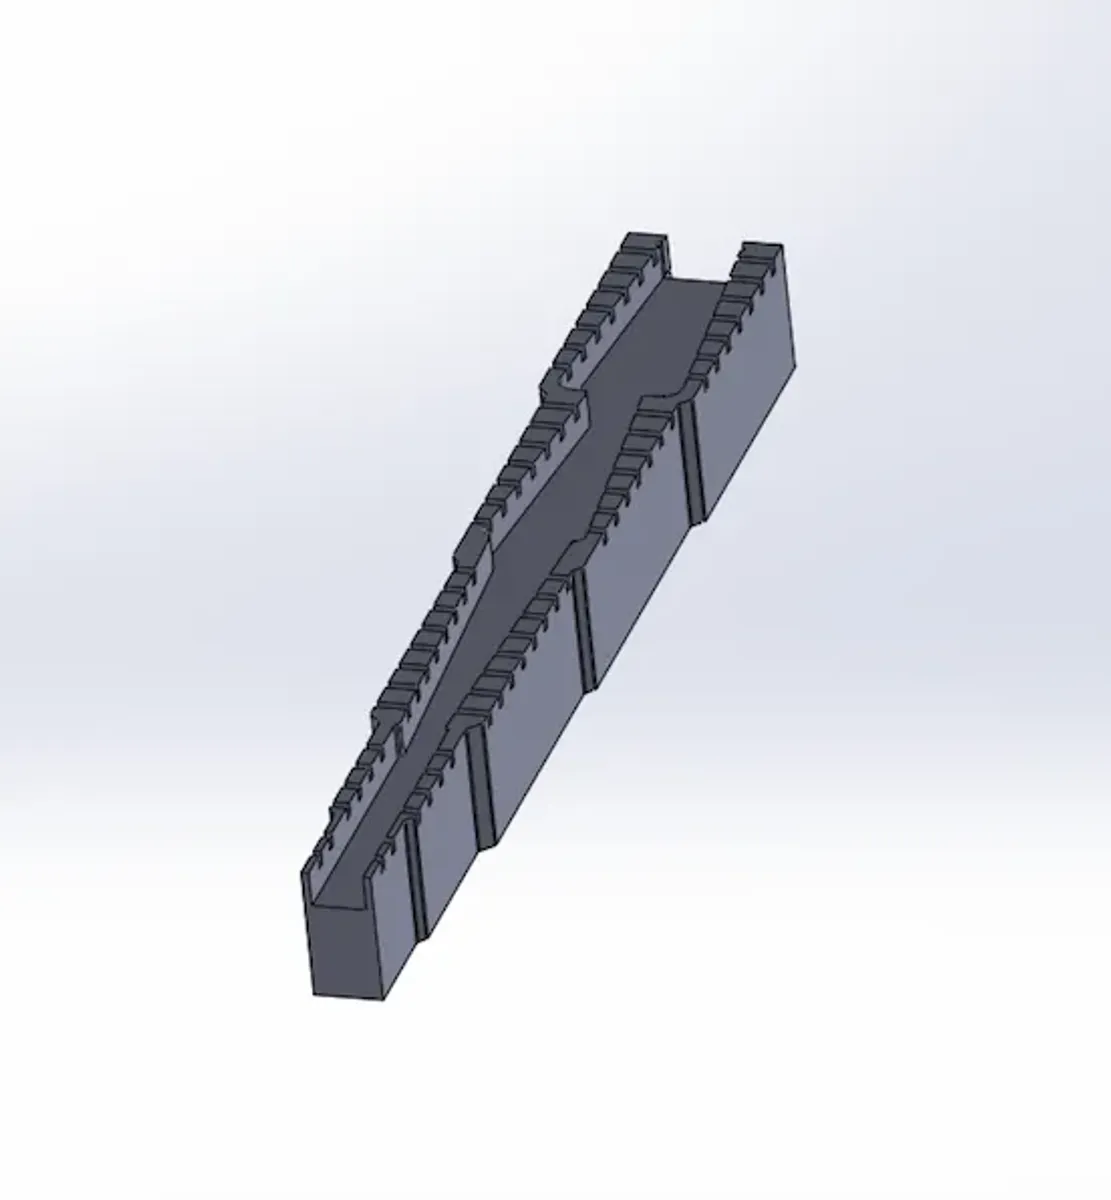 Lead-forming tool from
Timot